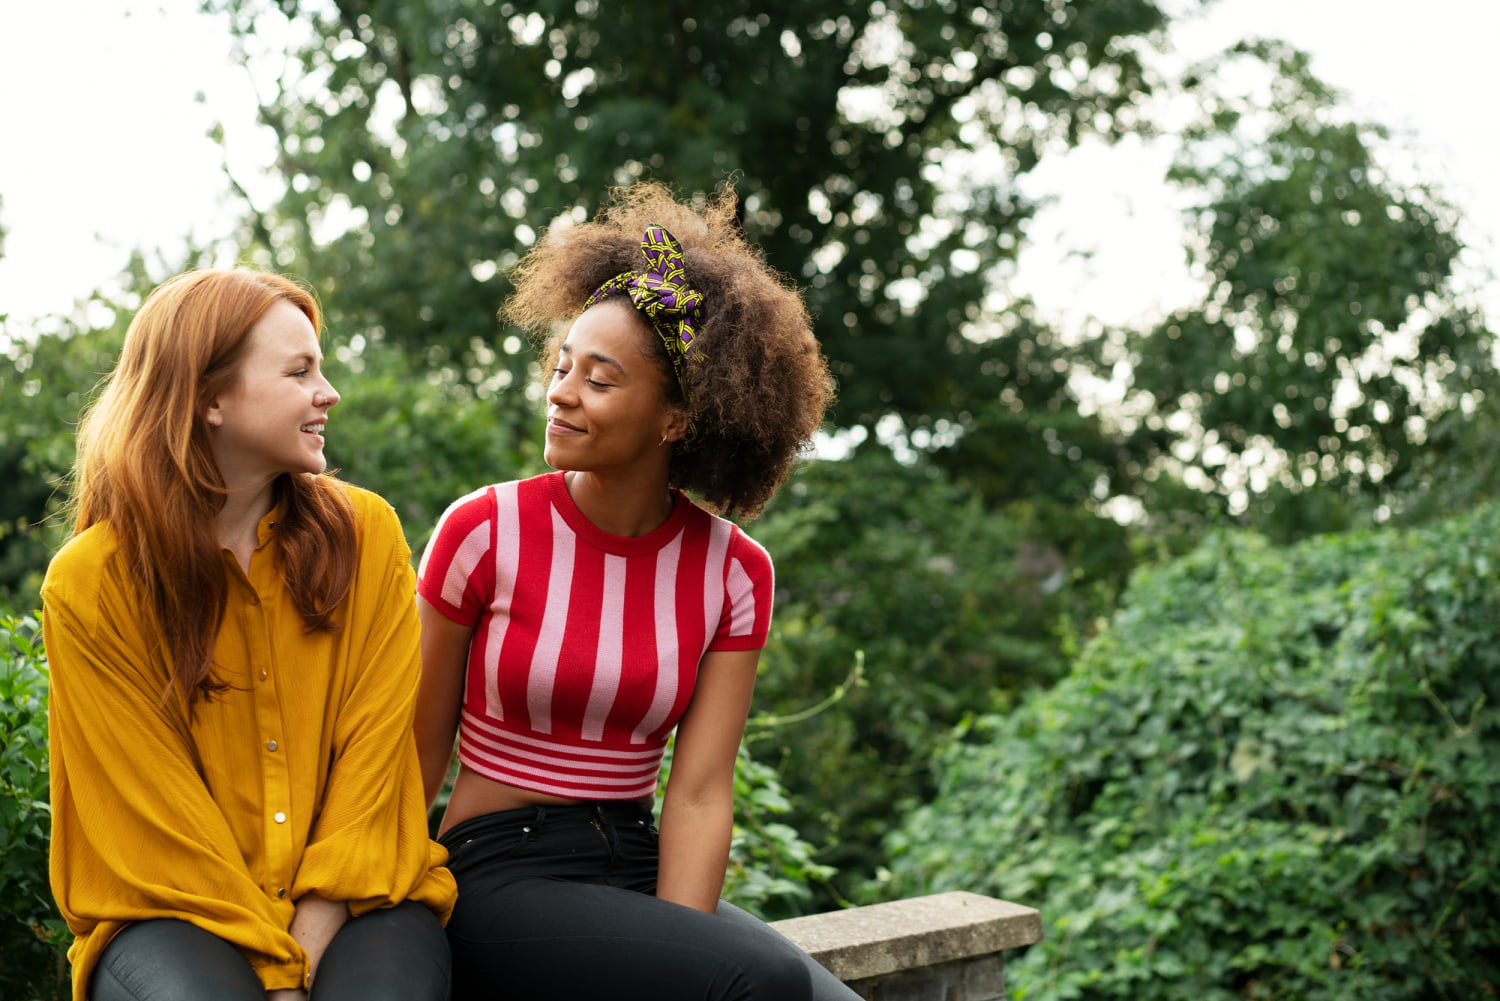 75 Best Questions to Ask Friends: Fun, Deep and Personal